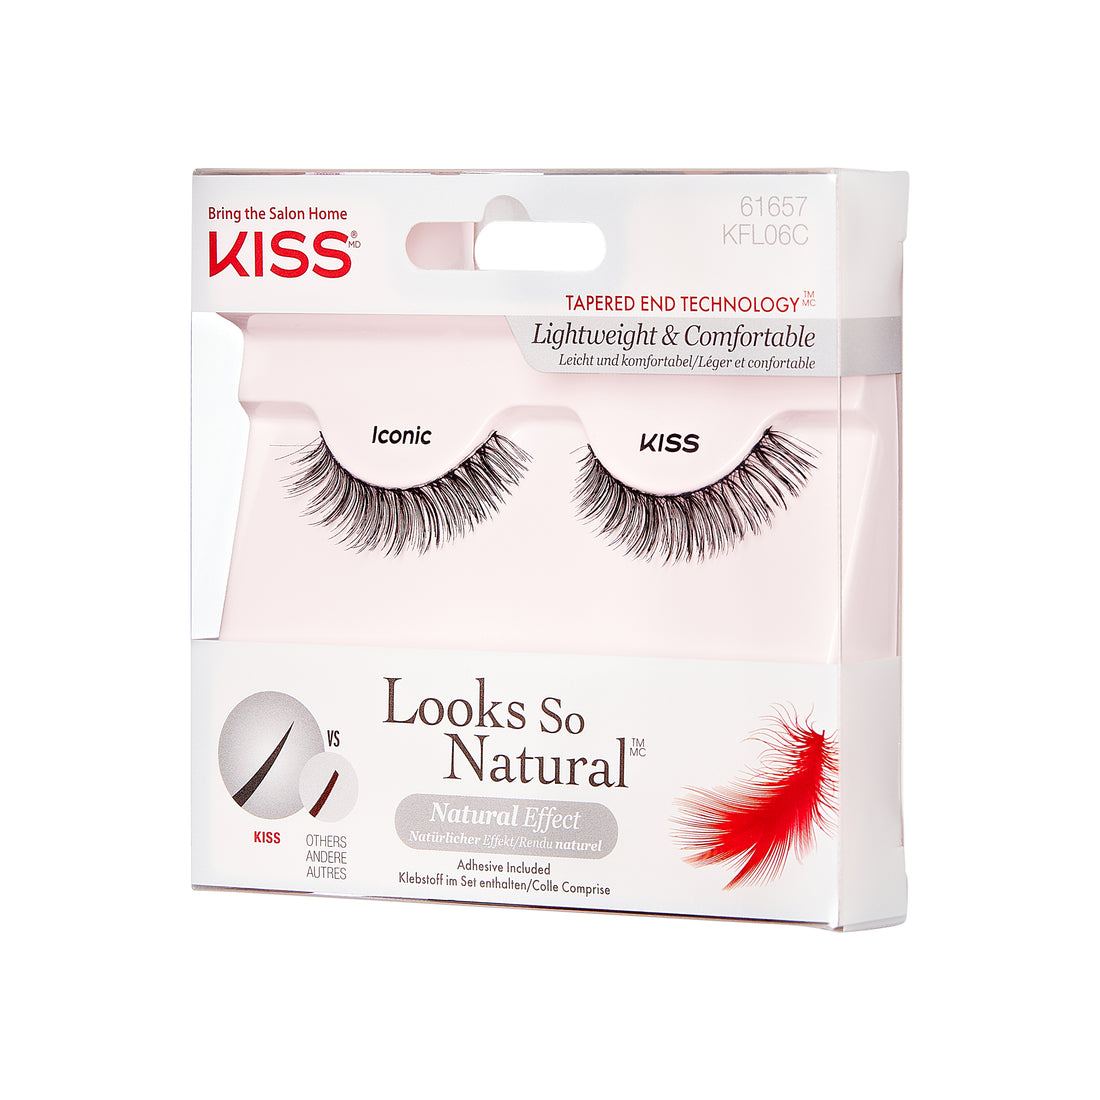 KISS Looks So Natural False Eyelashes with Tapered End Technology, &